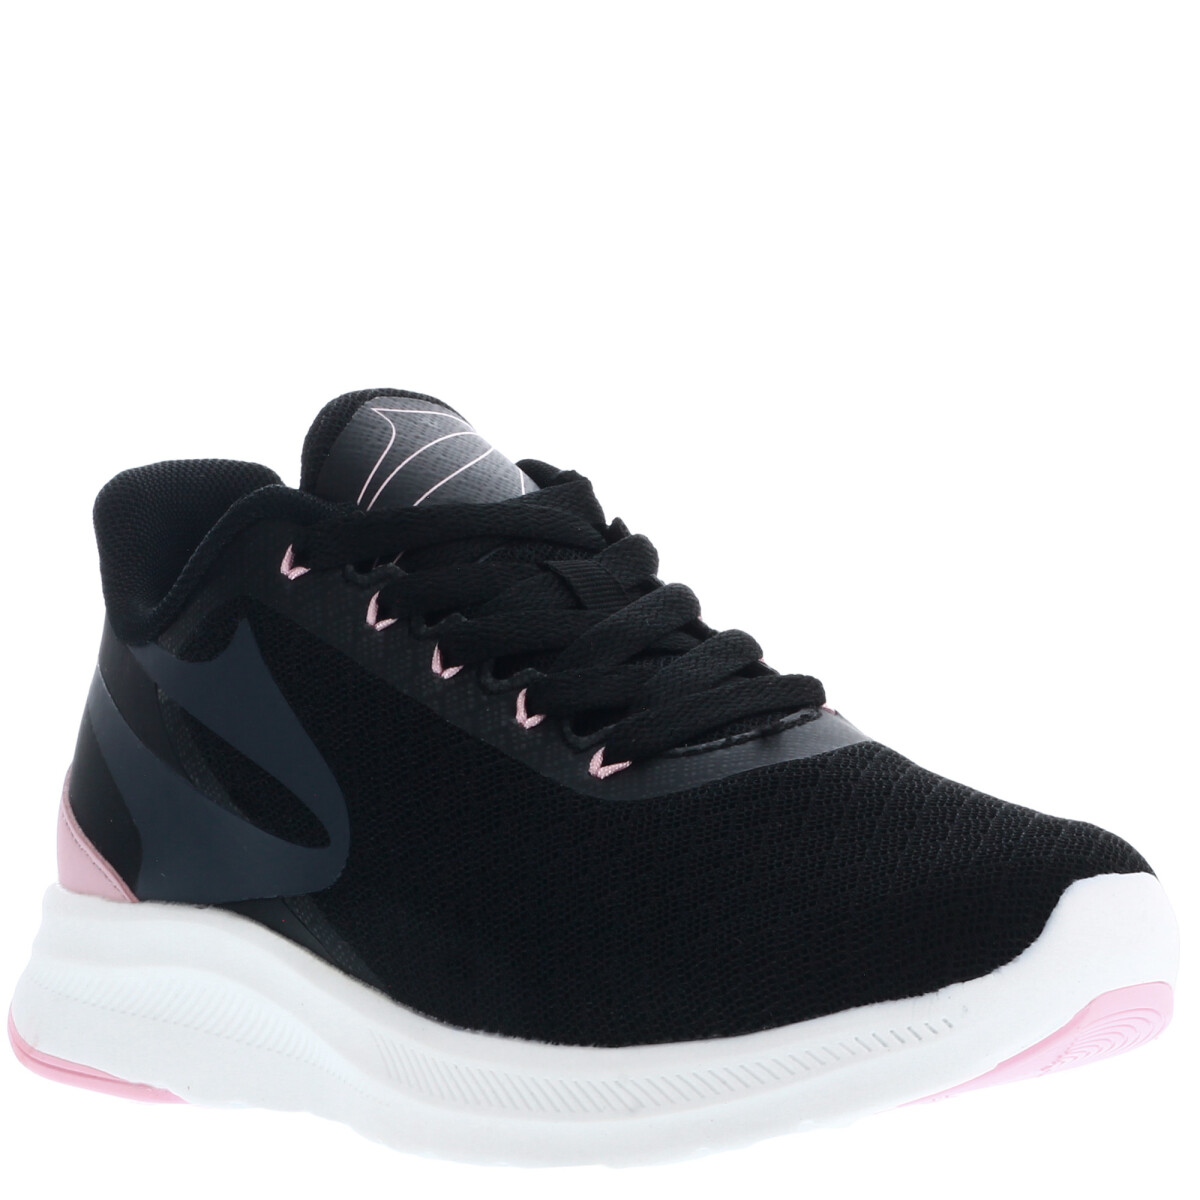 VR Speed Wns Topper - Negro/Rosa 